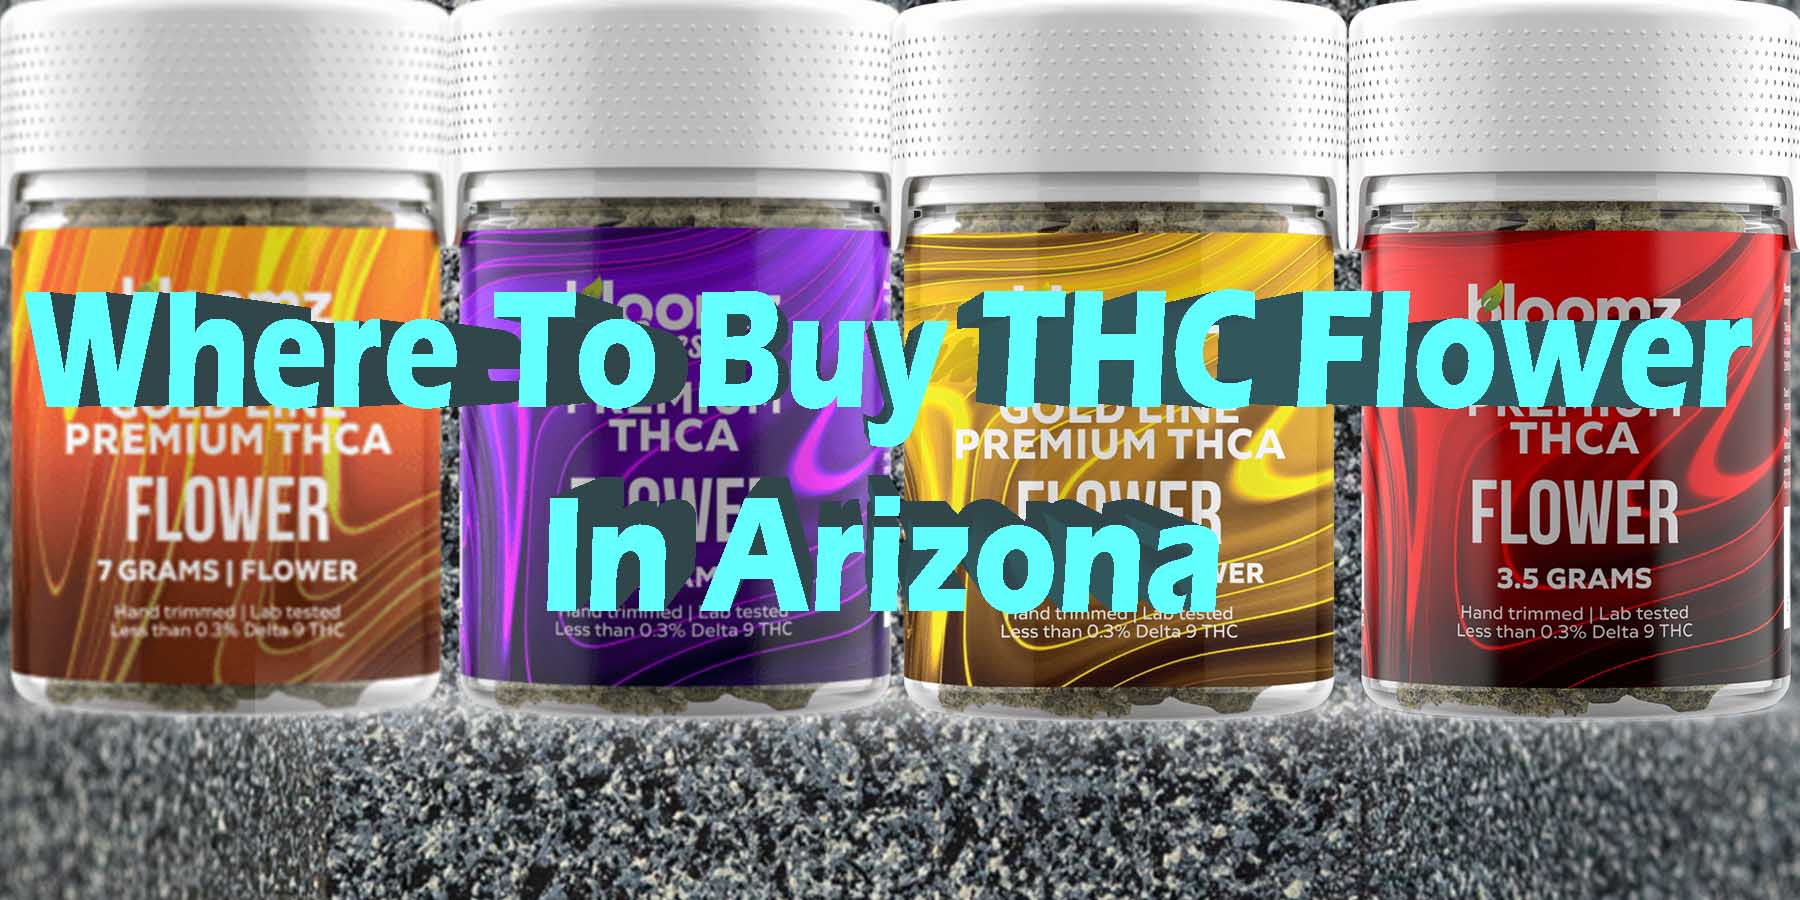 Where to Buy THC Flower in Arizona WhereToGet HowToGetNearMe BestPlace LowestPrice Coupon Discount For Smoking Best High Smoke Shop Online Near Me StrongestBrand BestBrand Binoid